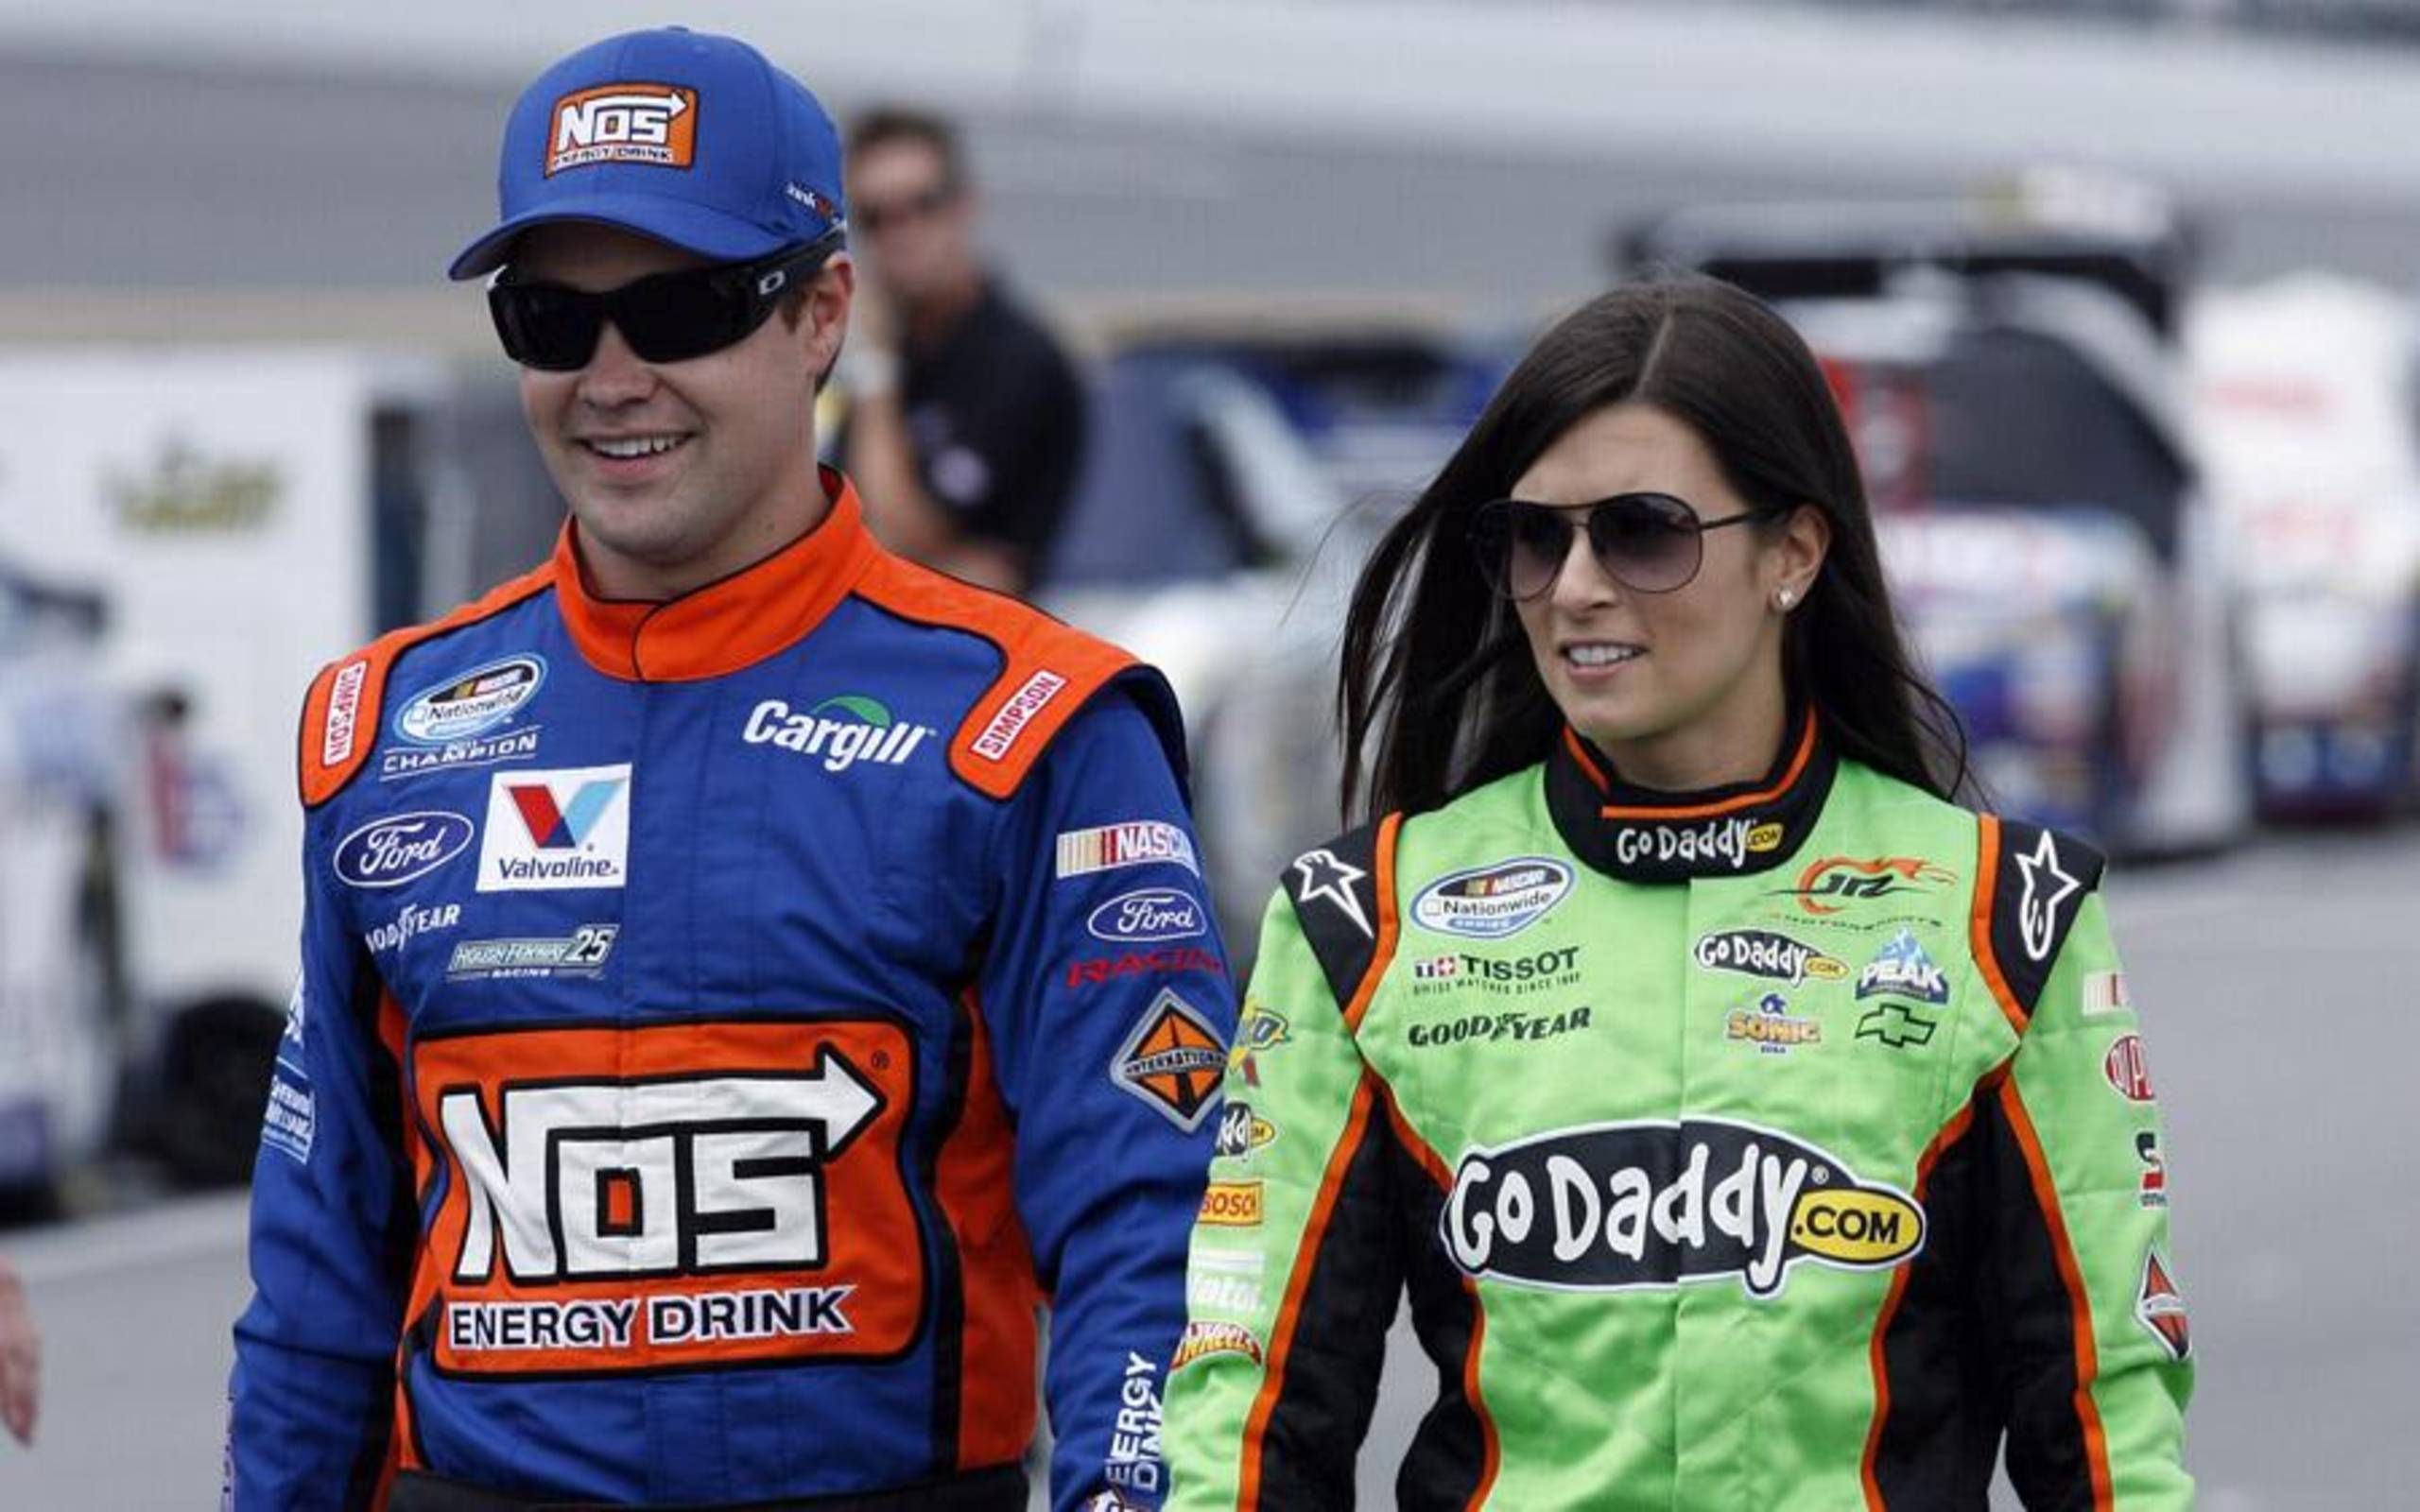 Danica dated fellow NASCAR driver Ricky Stenhouse Jr. from 2013 to 2017. 